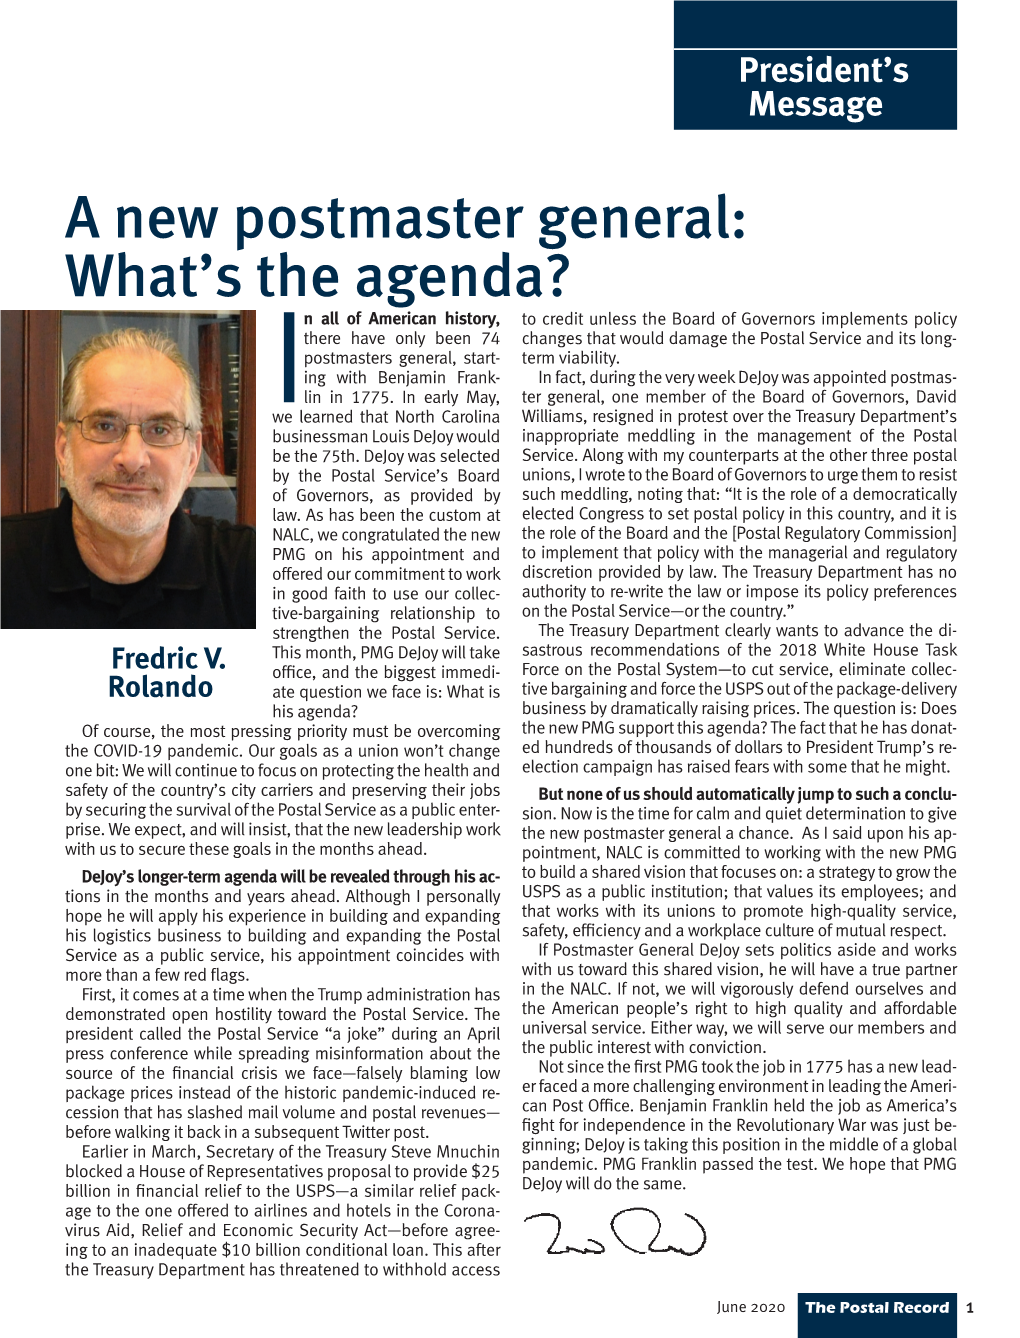 A New Postmaster General: What's the Agenda?